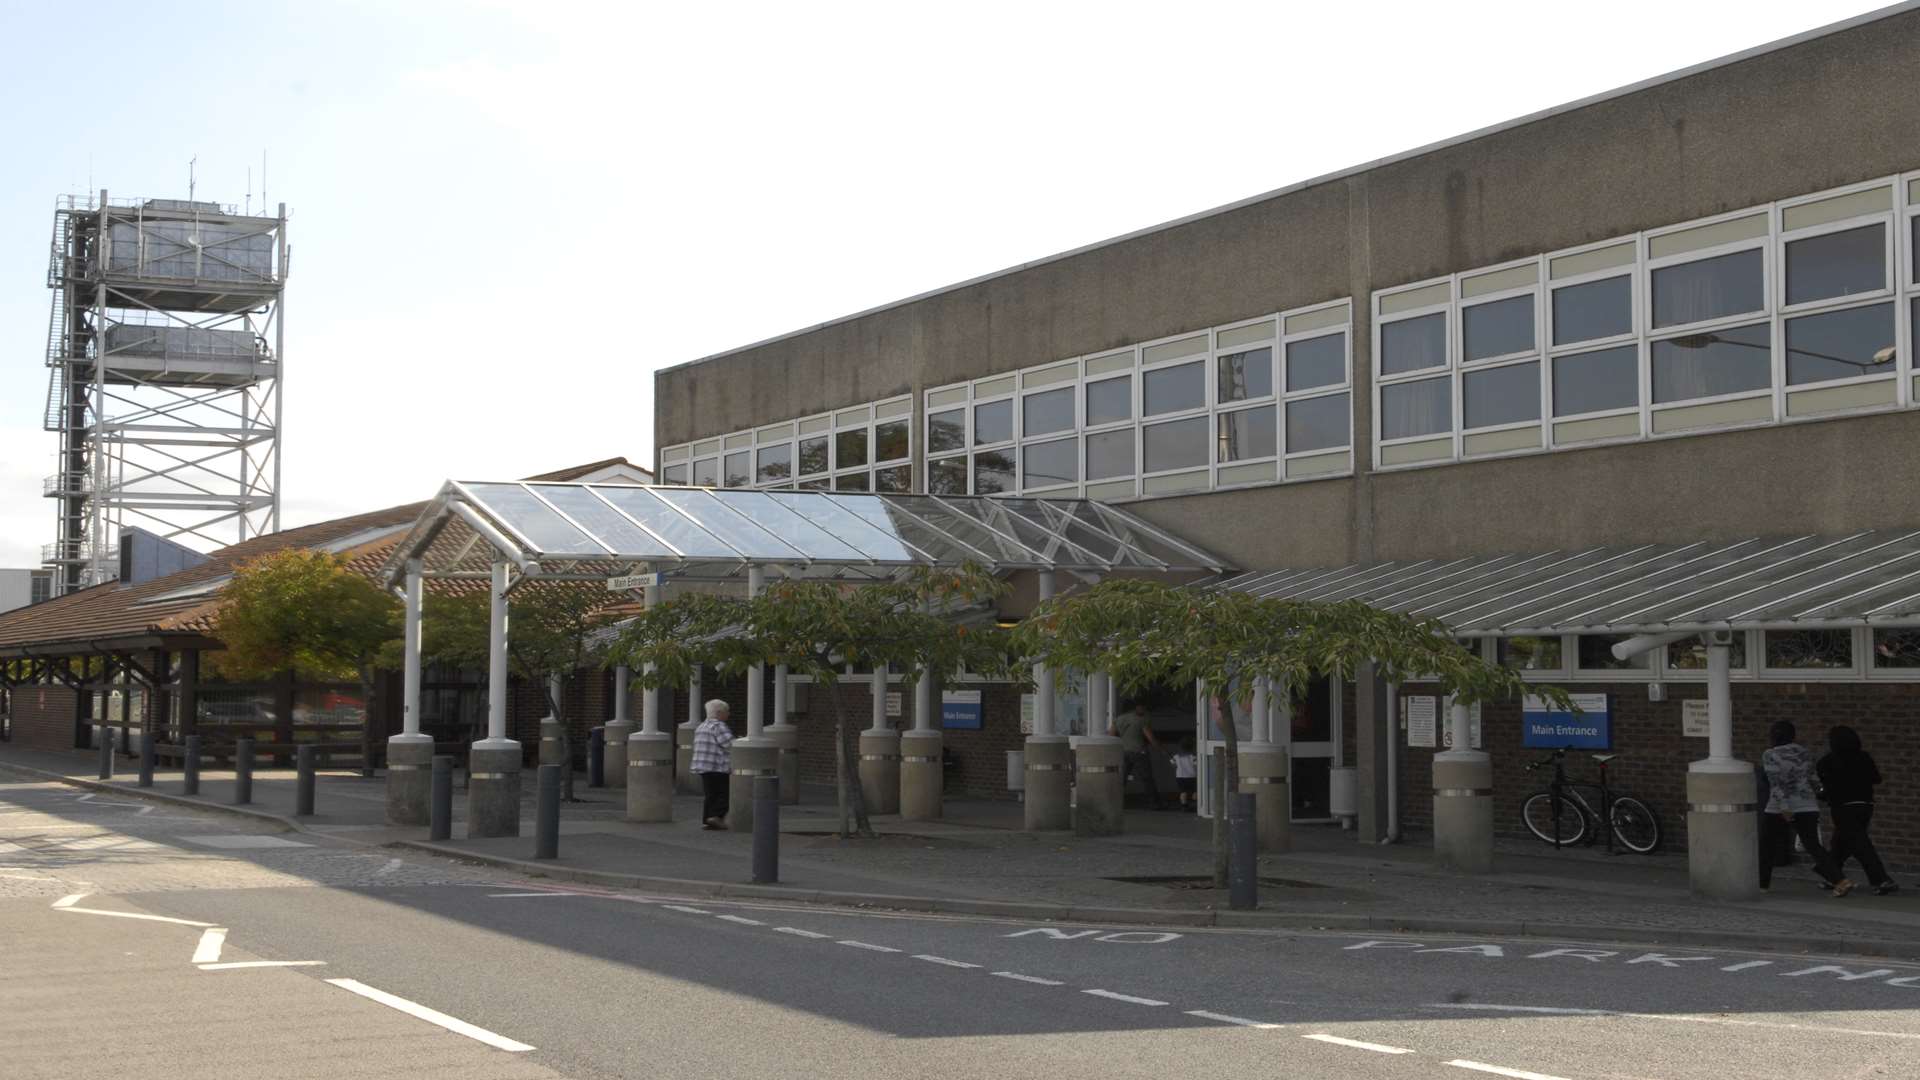 The William Harvey Hospital Ashford is currently the main focus for A&E care, along with the QEQM in Margate.